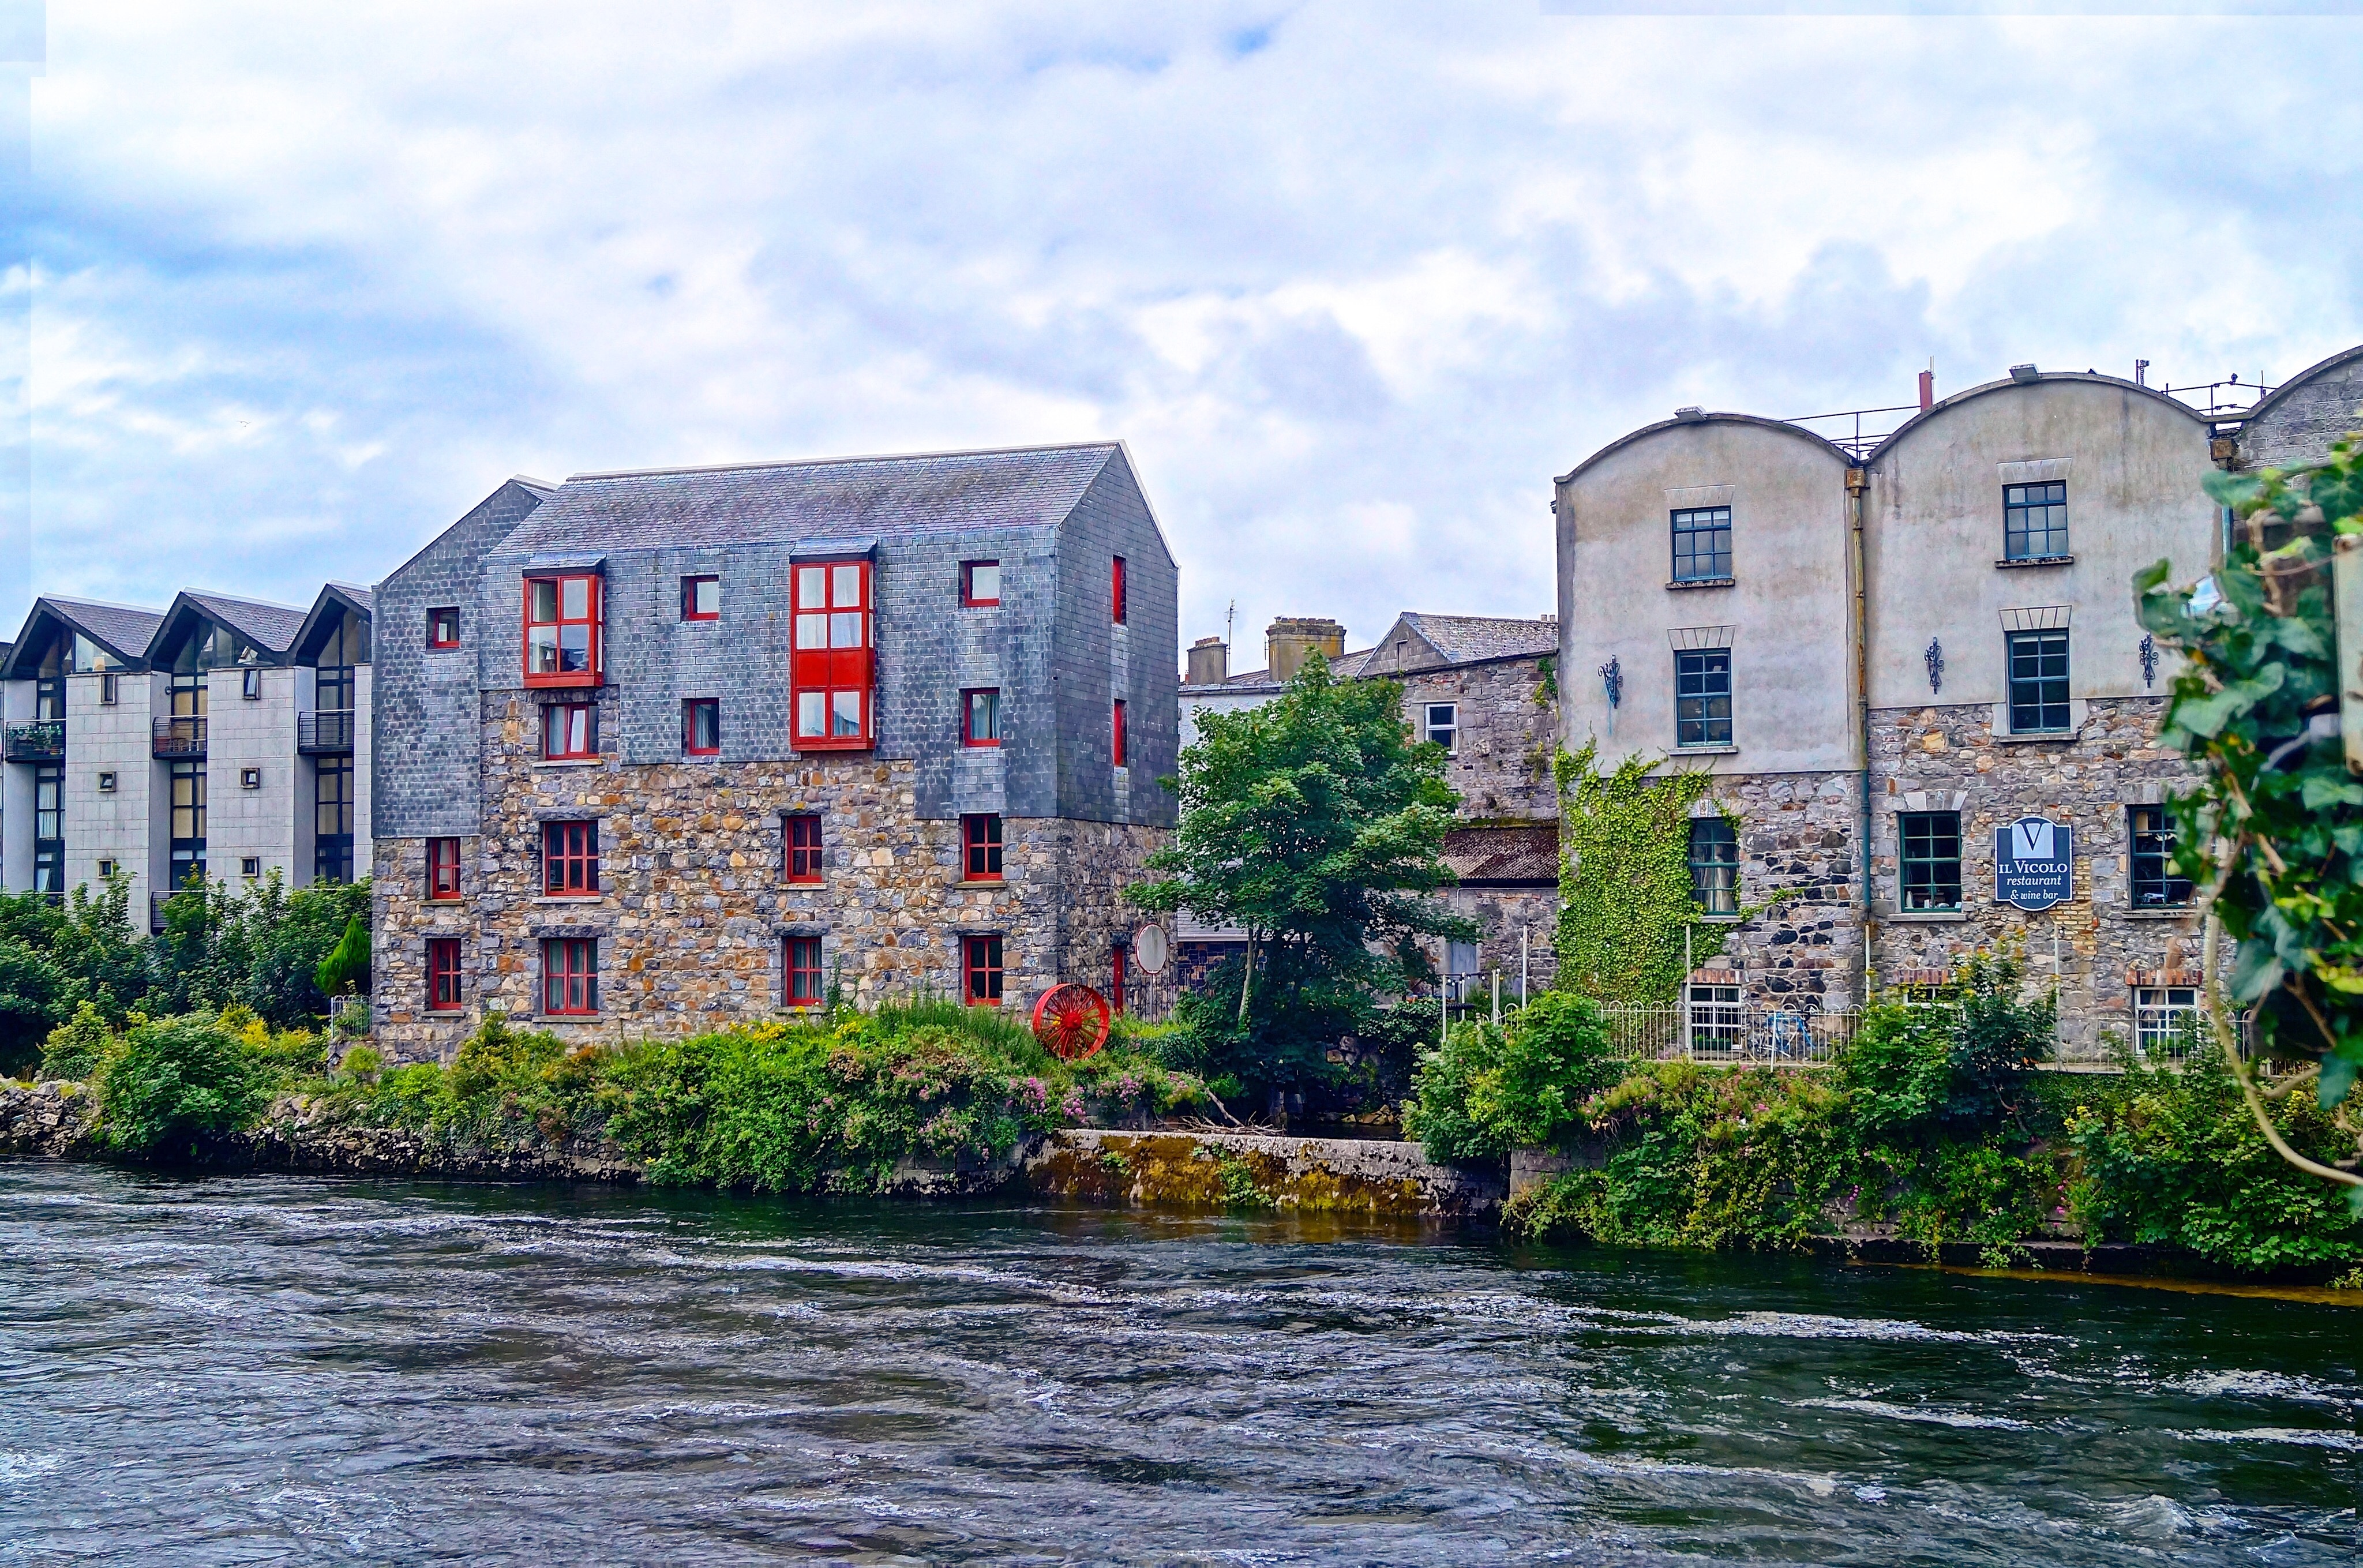 View of Galway houses across a river